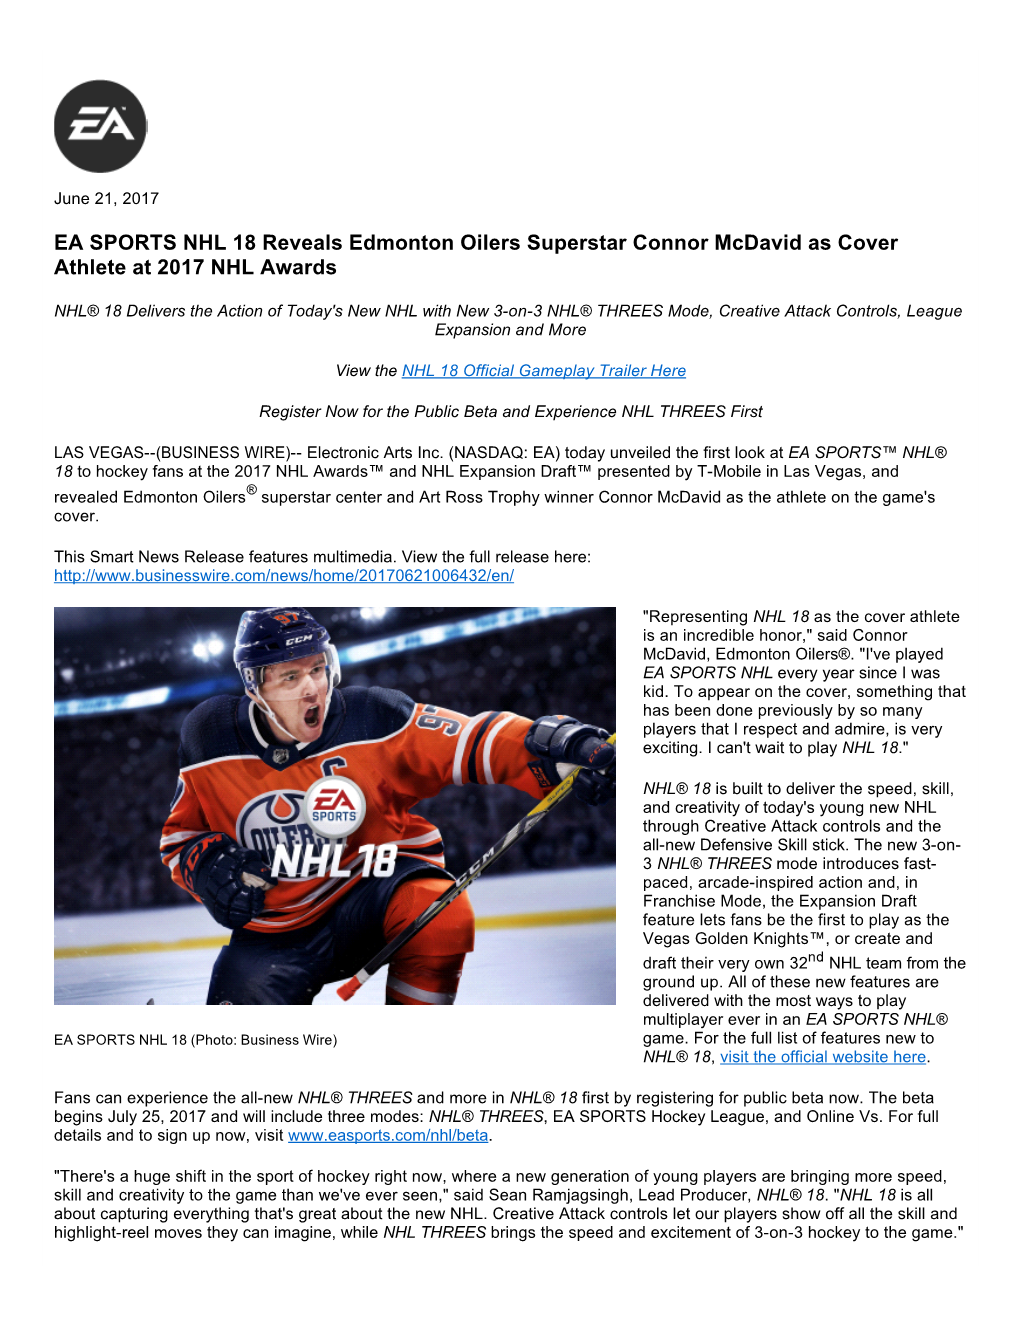 EA SPORTS NHL 18 Reveals Edmonton Oilers Superstar Connor Mcdavid As Cover Athlete at 2017 NHL Awards